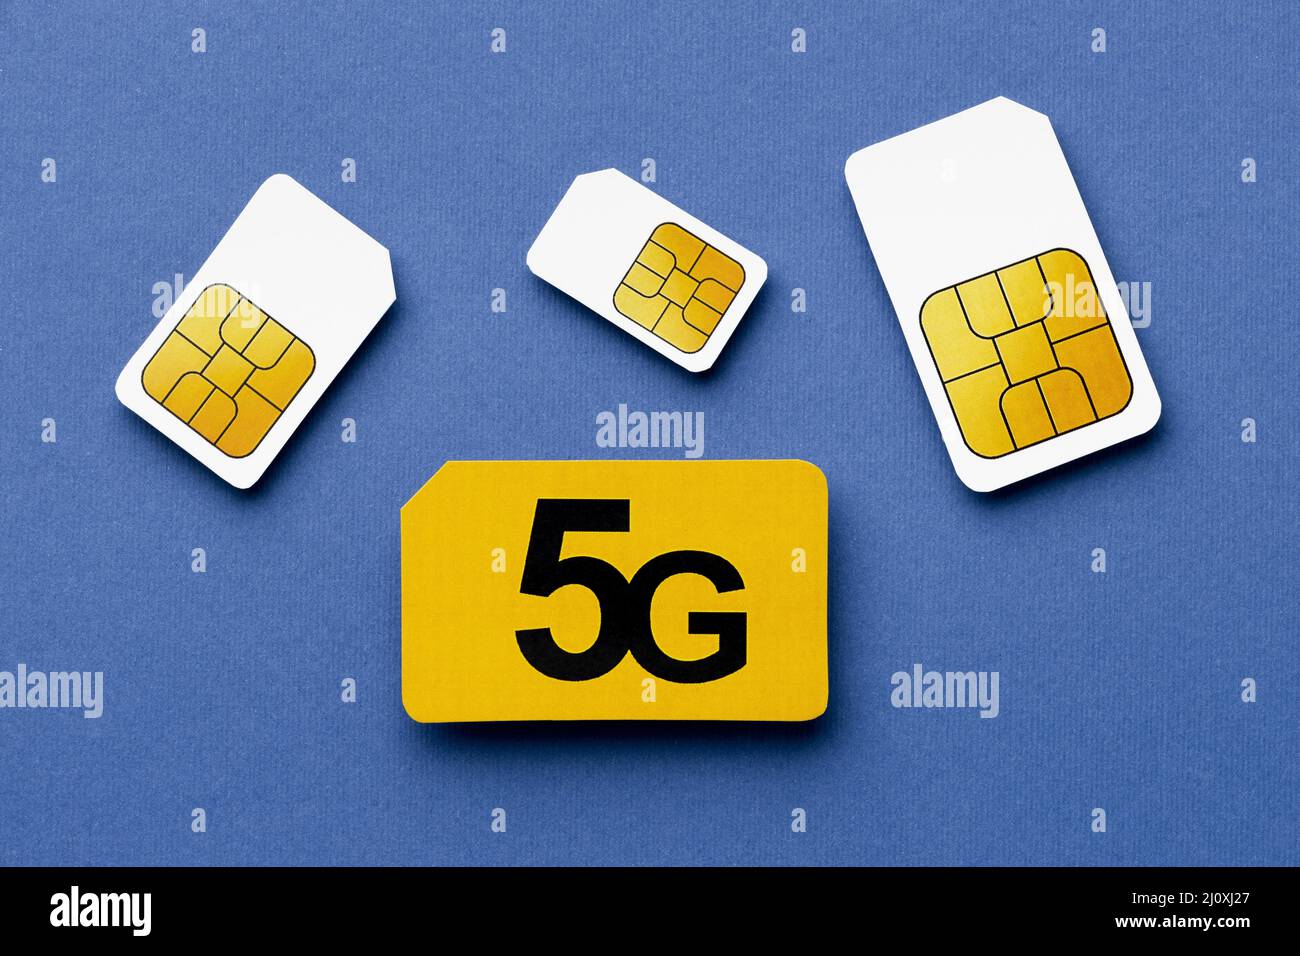 Top view 5g sim cards Stock Photo